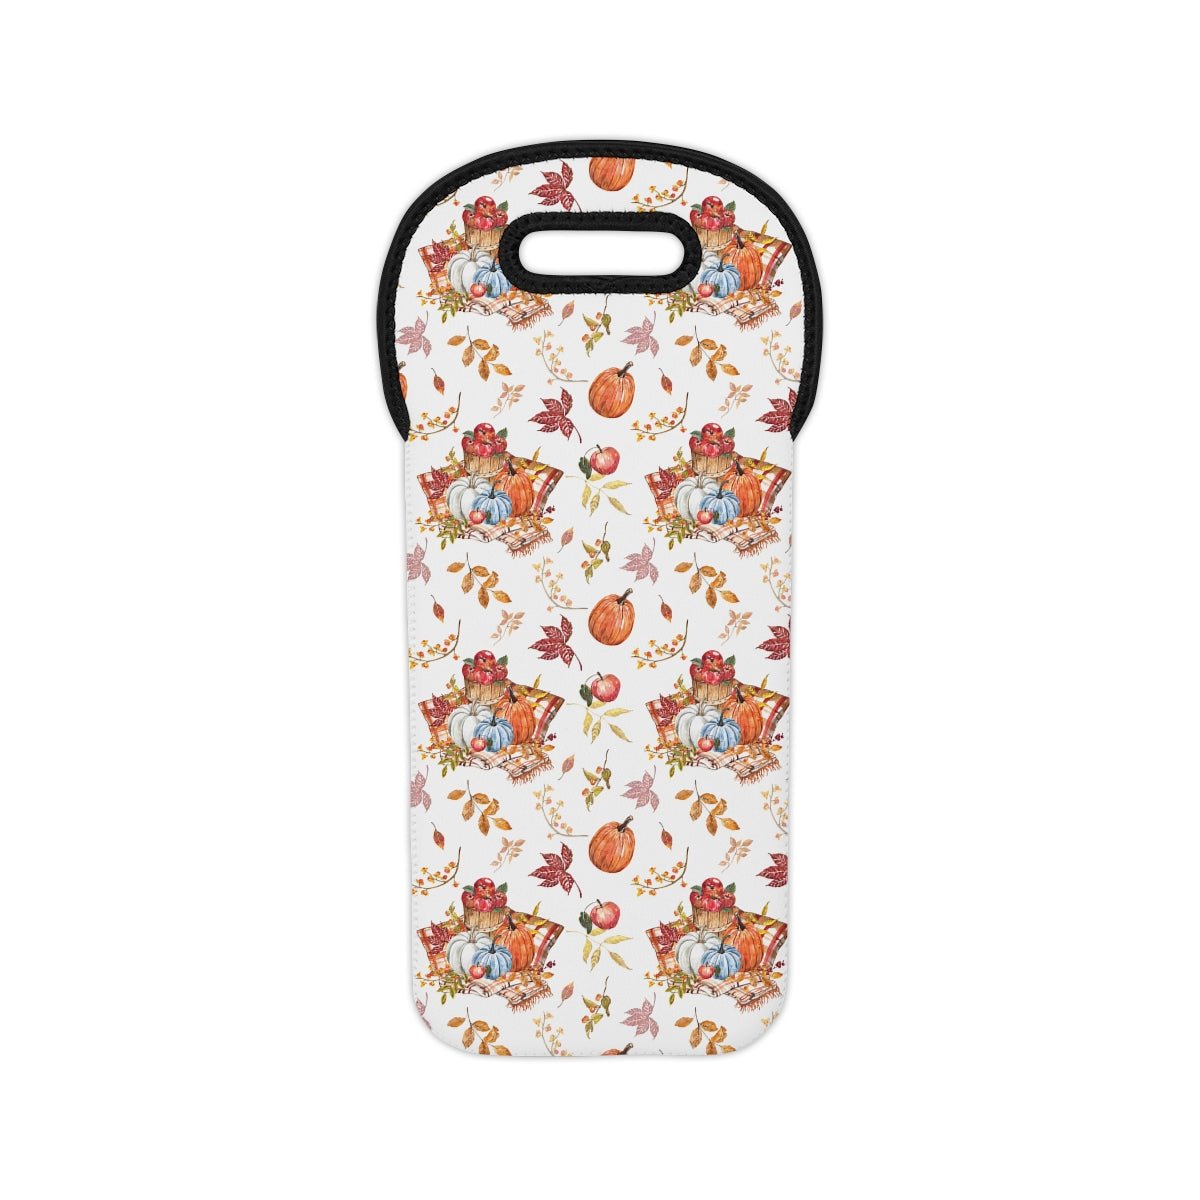 Fall Pumpkins and Apples Wine Tote Bag - Puffin Lime